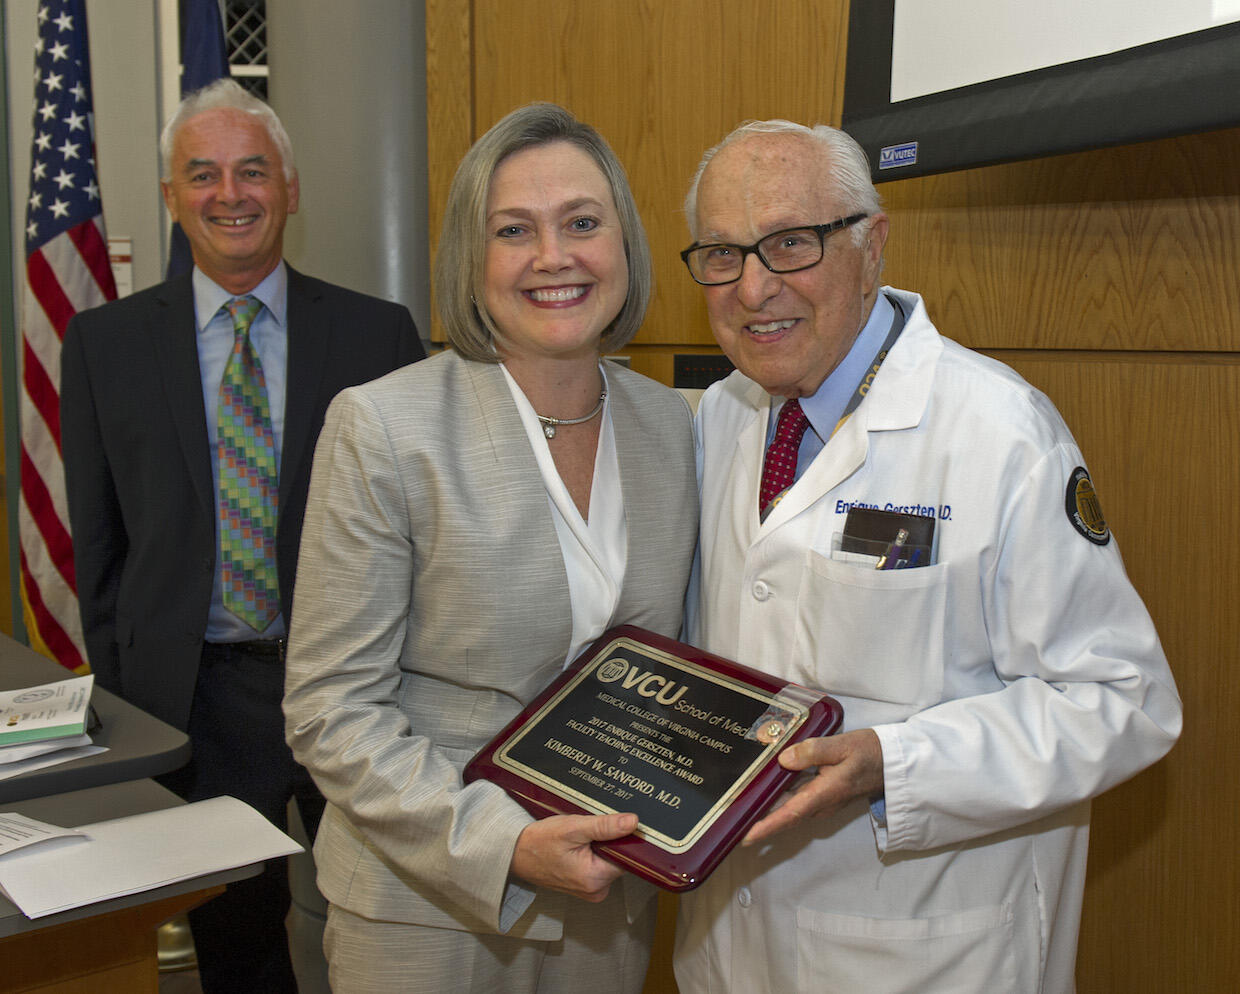 Enrique Gerszten, M.D., with Kimberly W. Sanford, M.D., associate professor in the Department of Pathology. Peter Buckley, M.D., dean of the School of Medicine, is in the background.